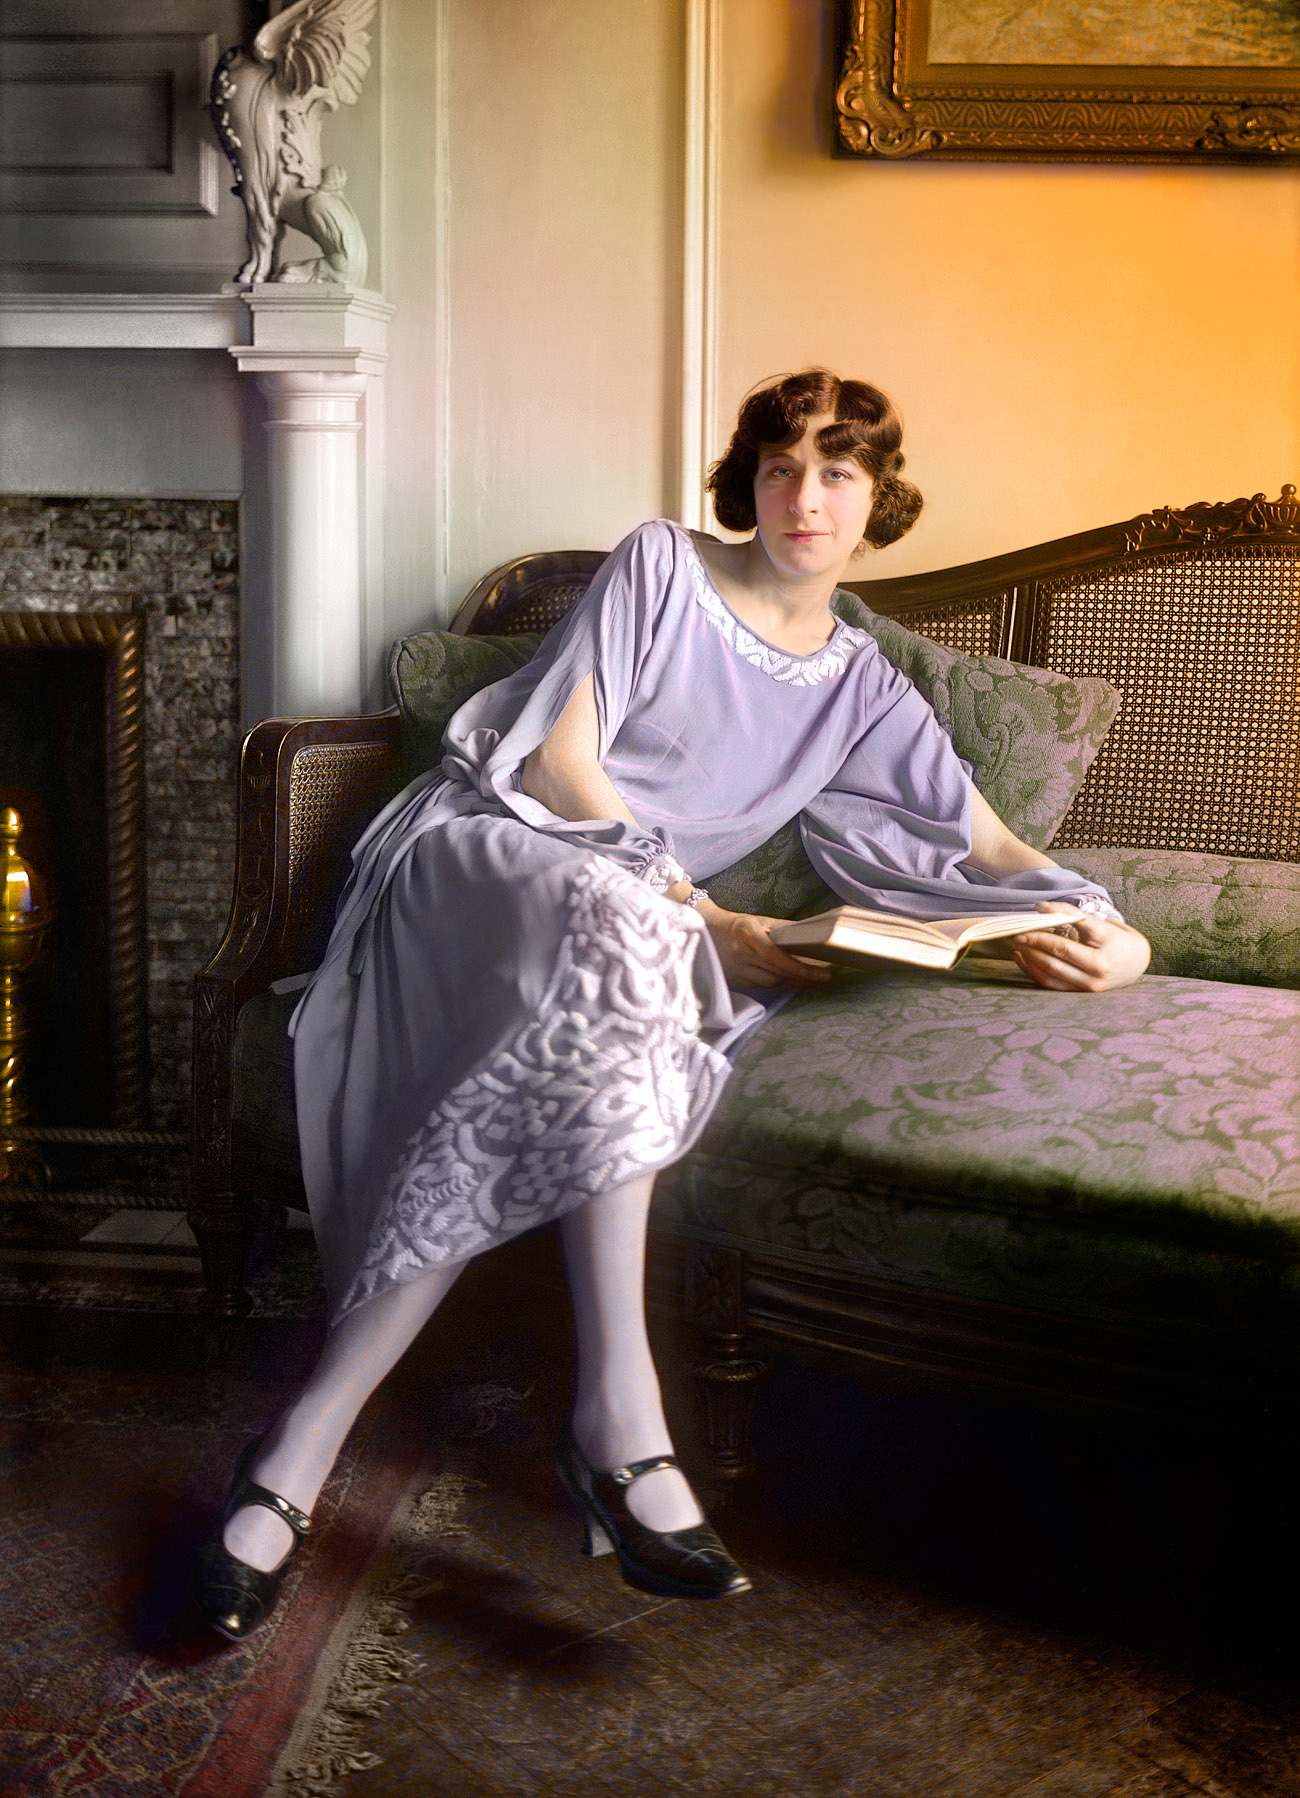 I'm too young to remember Fanny Brice, but I was attracted to the photo's elegant composition and the possibilities of light and color. Colorization of the original done in Photoshop using multiple layers and blend modes. View full size.